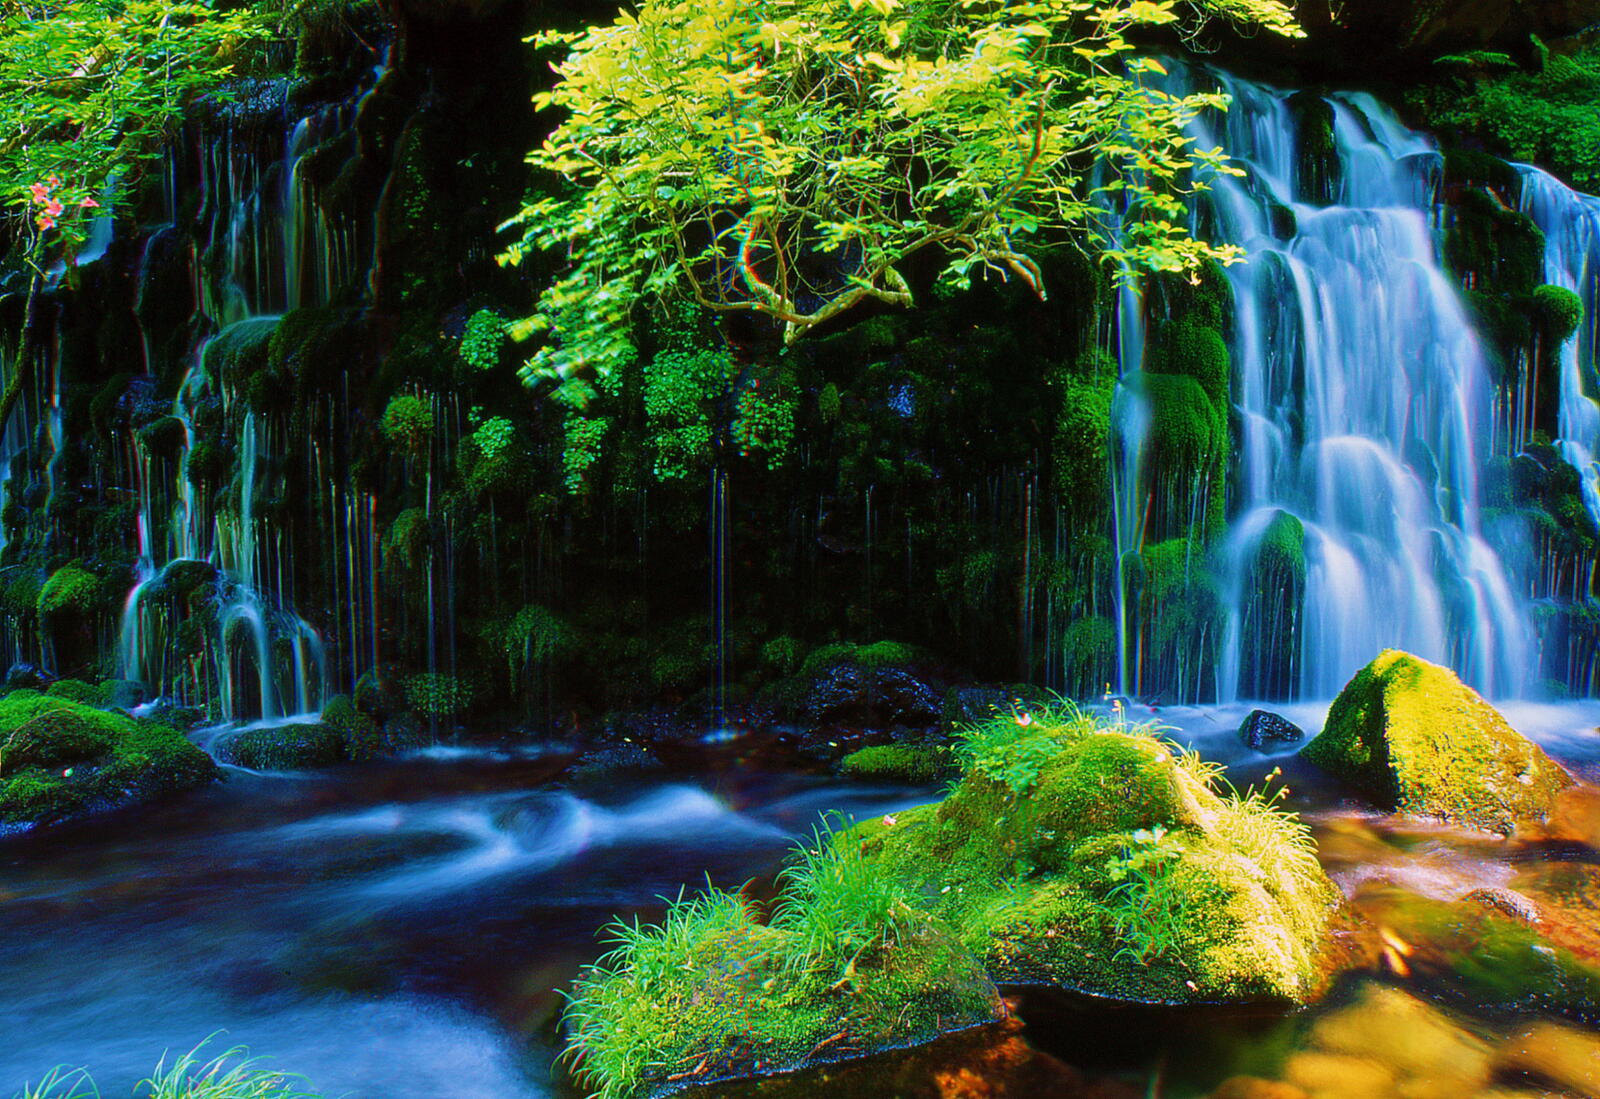 Wallpapers moss forest Japan on the desktop